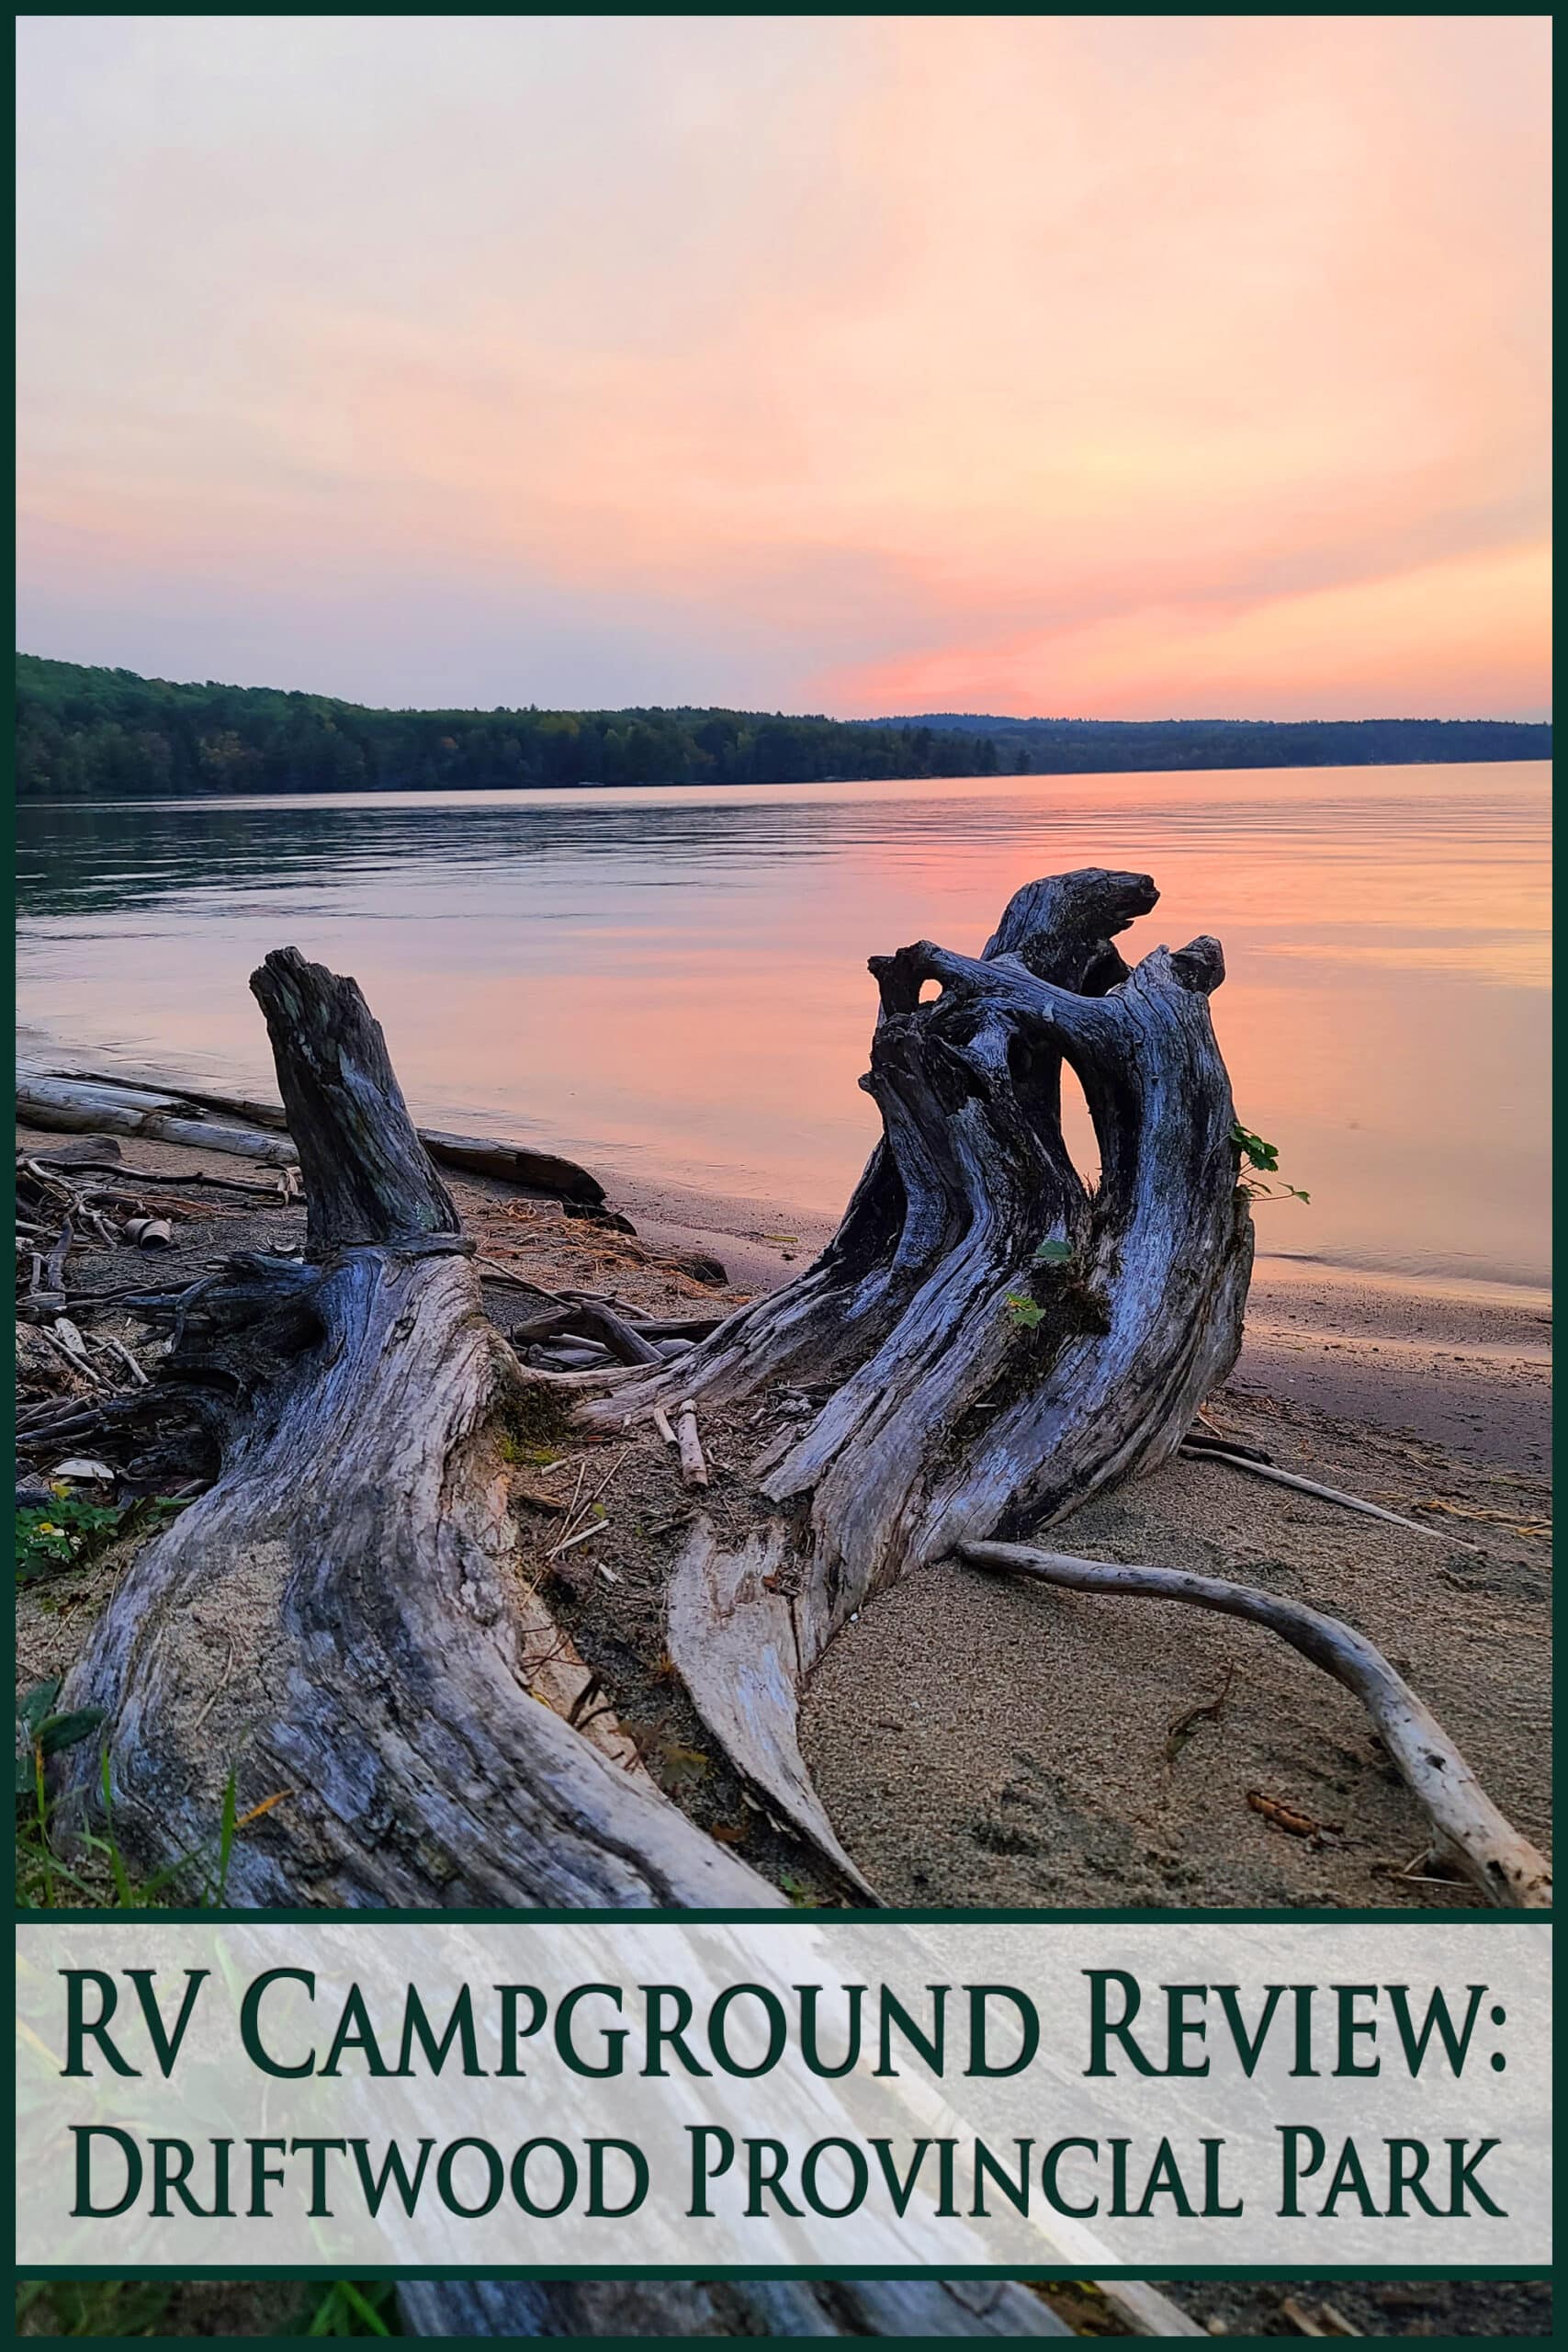 Large pieces of drift wood on the shore of the Ottawa River. Overlaid text says RV campground review driftwood provincial park.